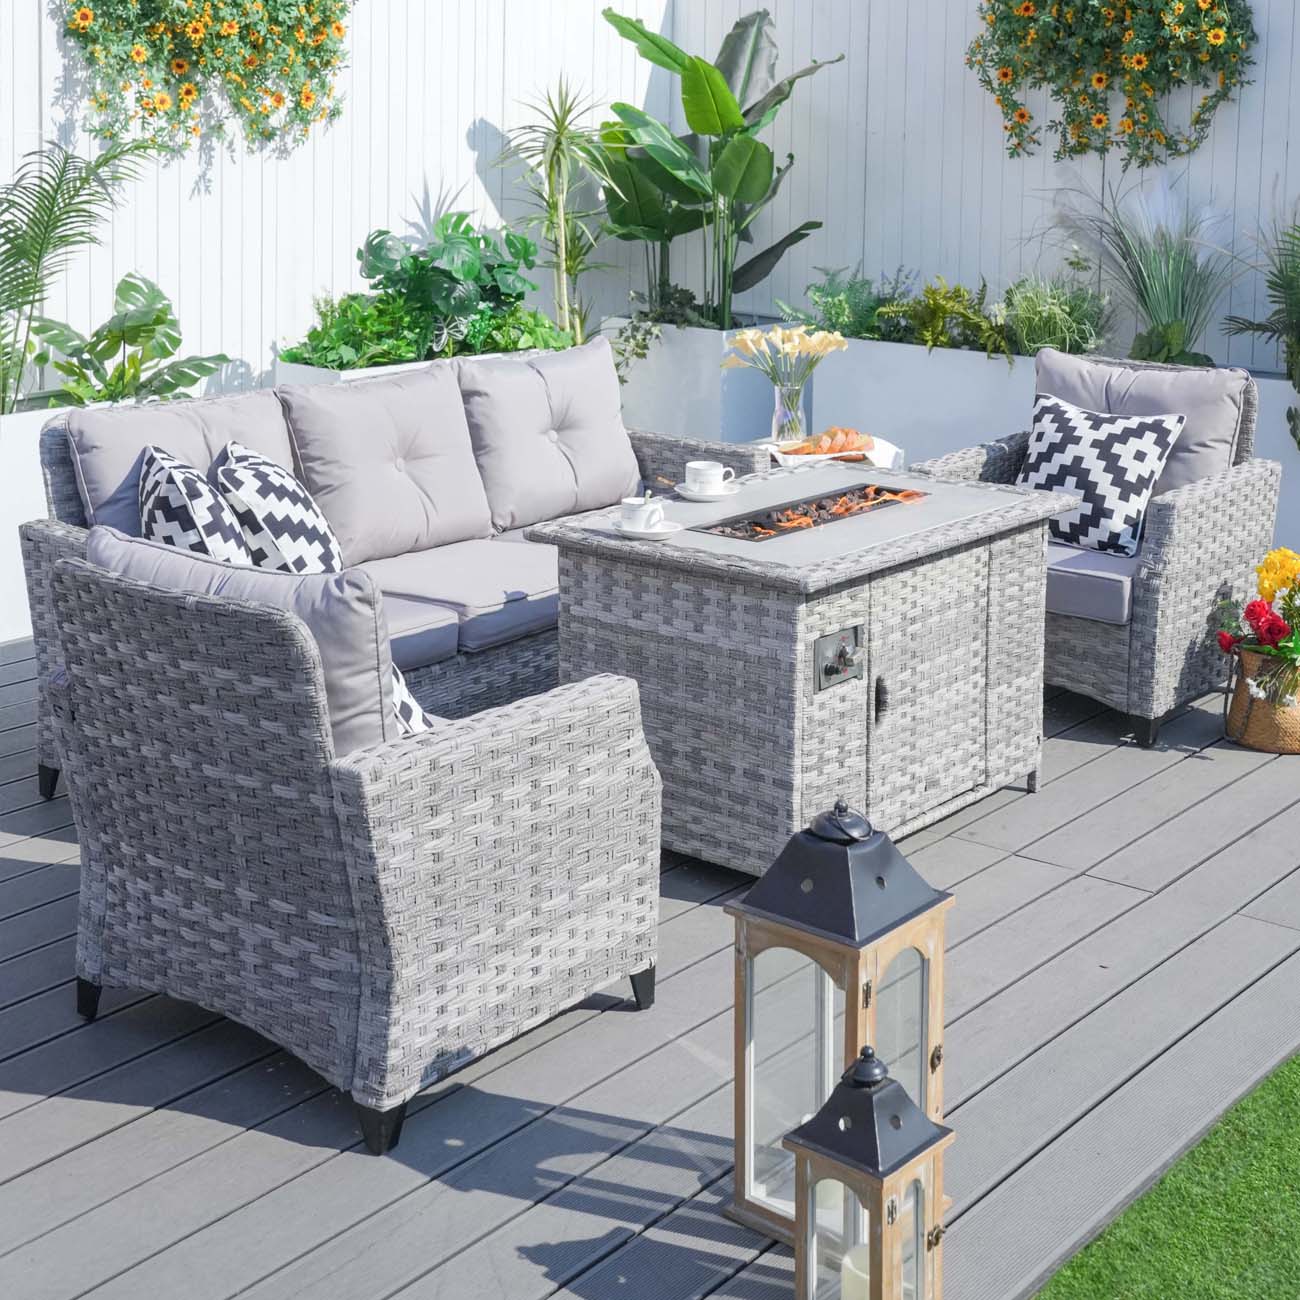 Garden Rattan Wicker Out Furniture Patio Convention Sofa Set With Fire Pit Coffee Table Sale - Abrihome